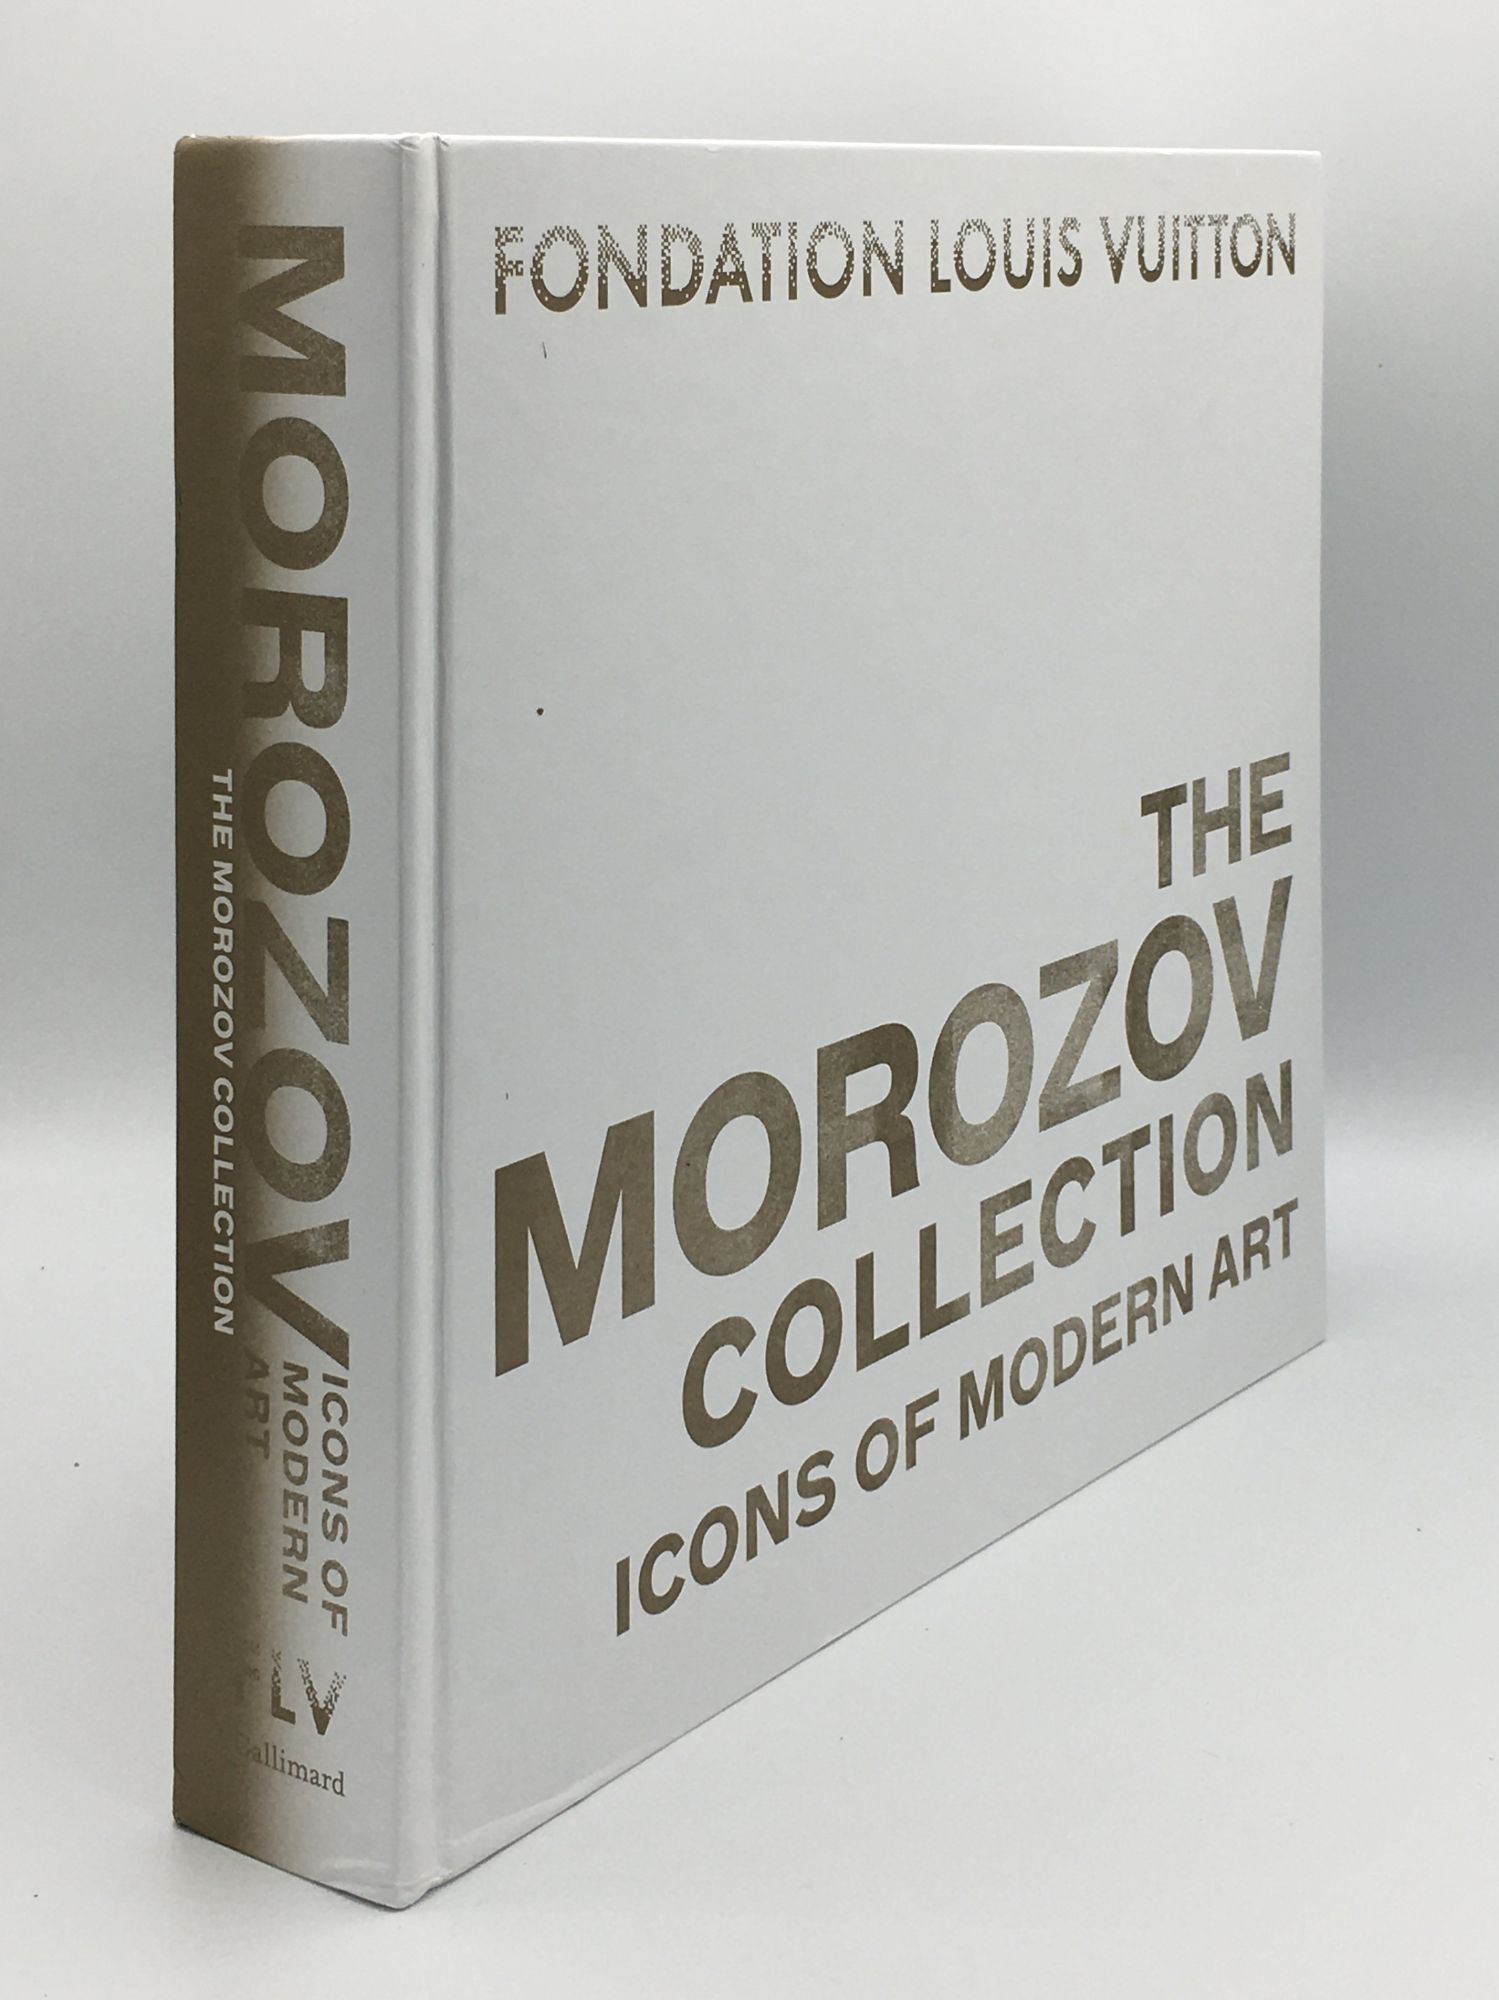 Icons of Modern Art: The Morozov collection